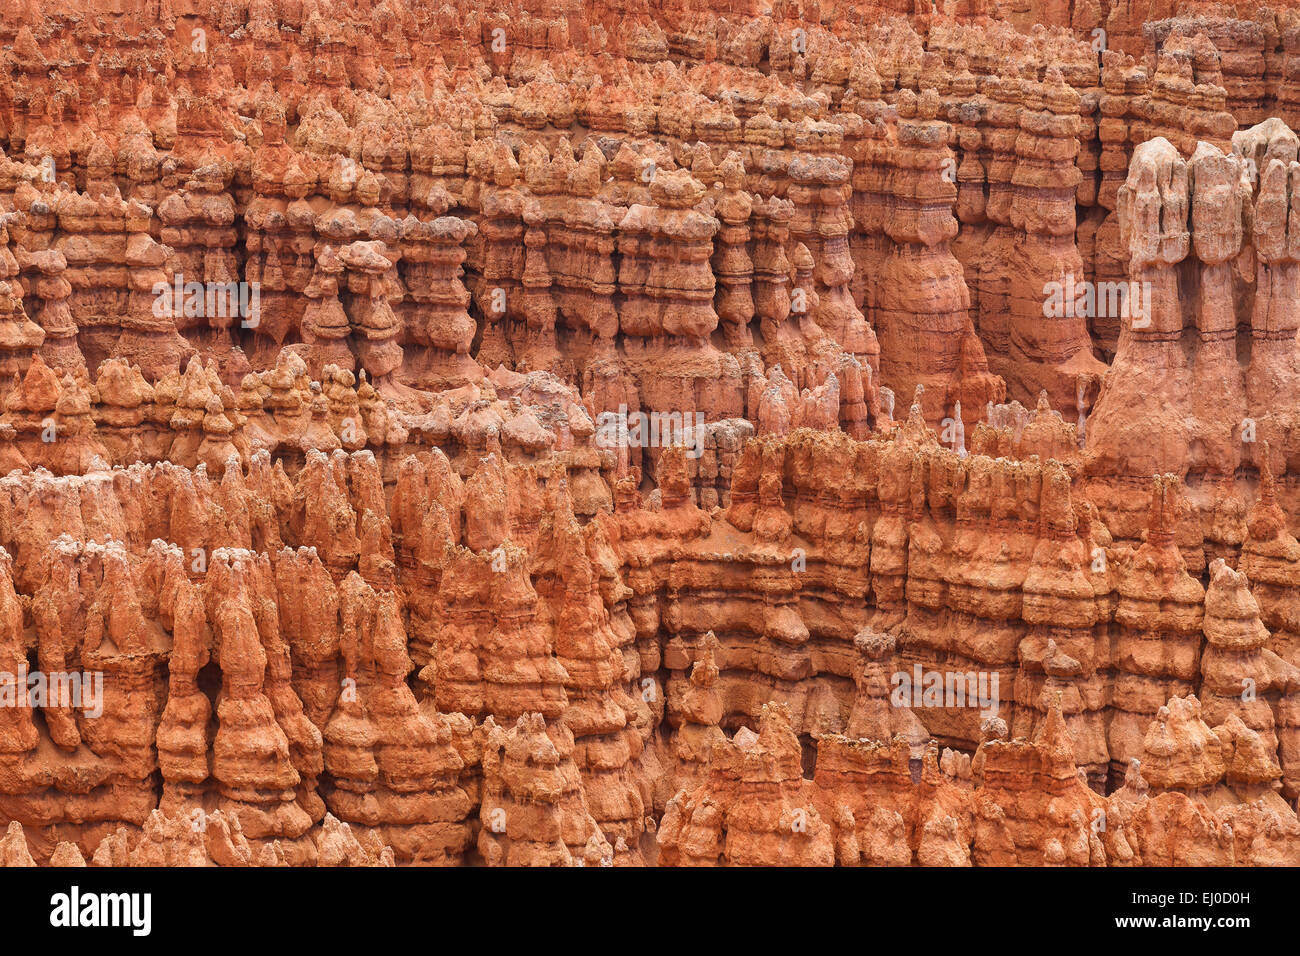 Detail of the hoodoos at Brycen Canyon National Park, Utah, United States of America. Stock Photo